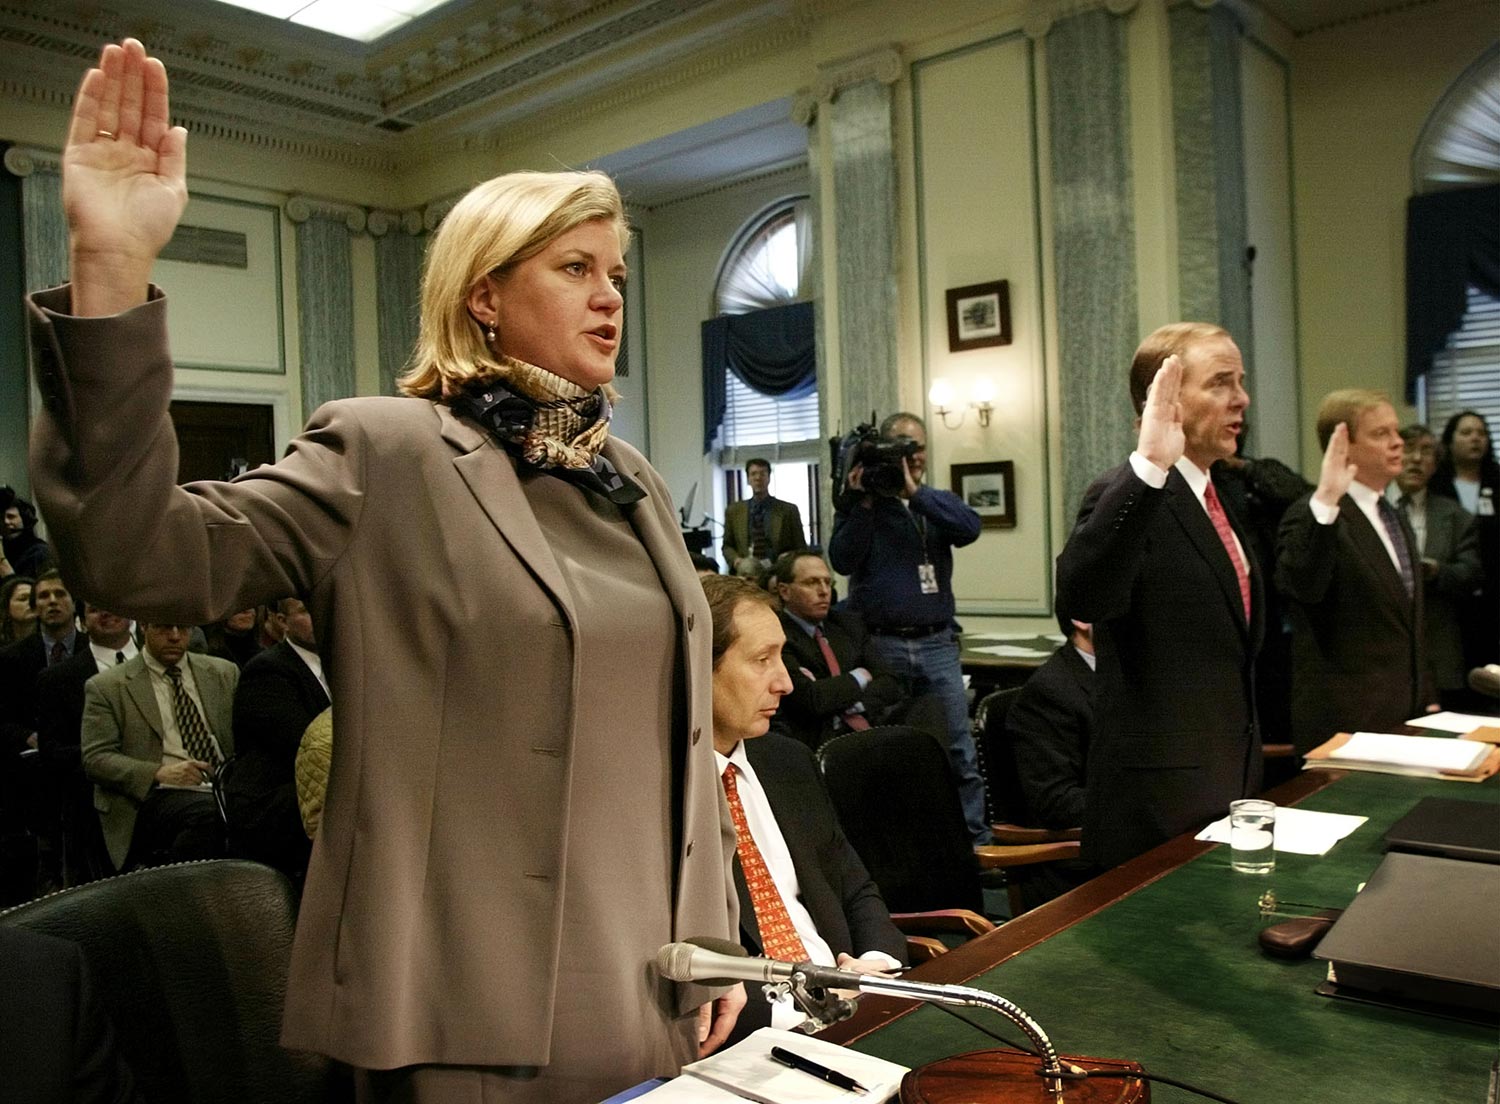 The woman who brought down Enron, Sherron Watkins, is sworn in before giving her testimony to U.S. lawmakers. (Credit: REUTERS/Win McNamee)